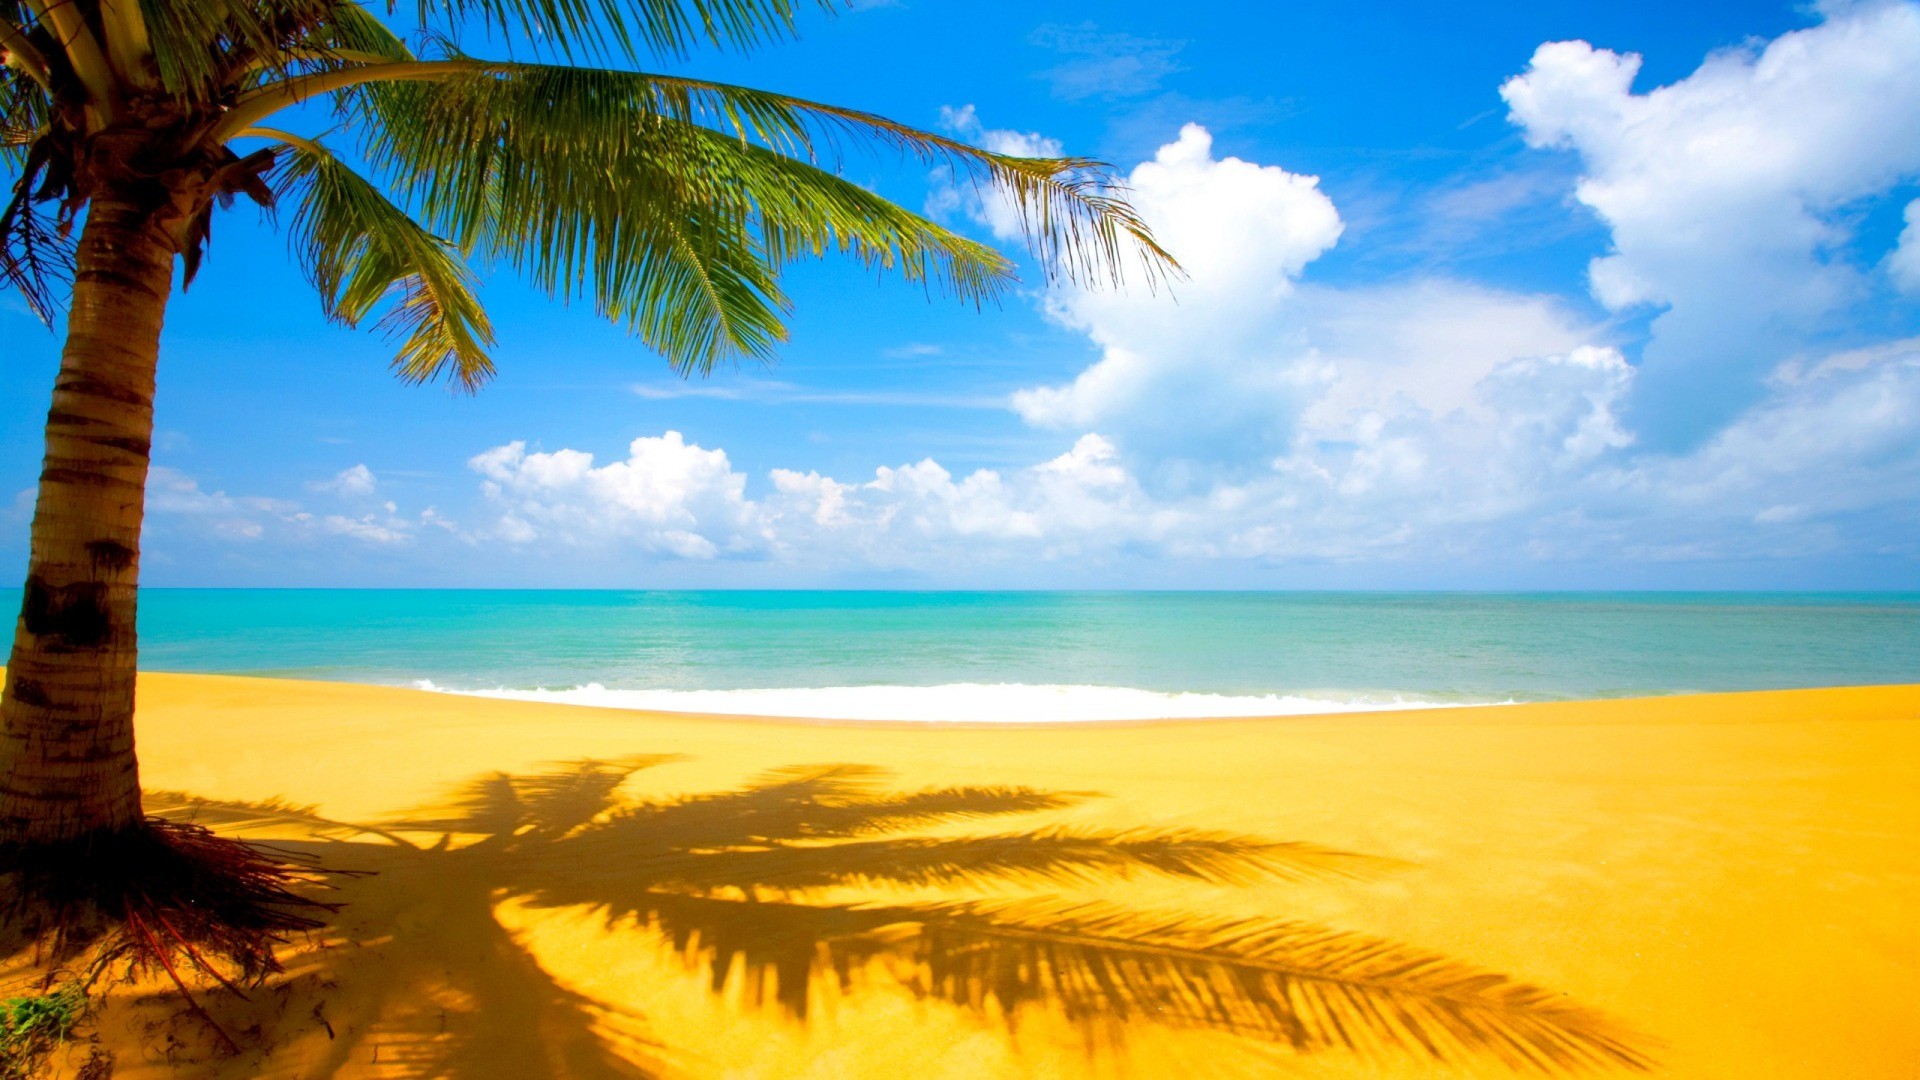 1920x1080 ... Summer Vacation Backgrounds | Wallpapers-Web Gallery Summer Vacation ...